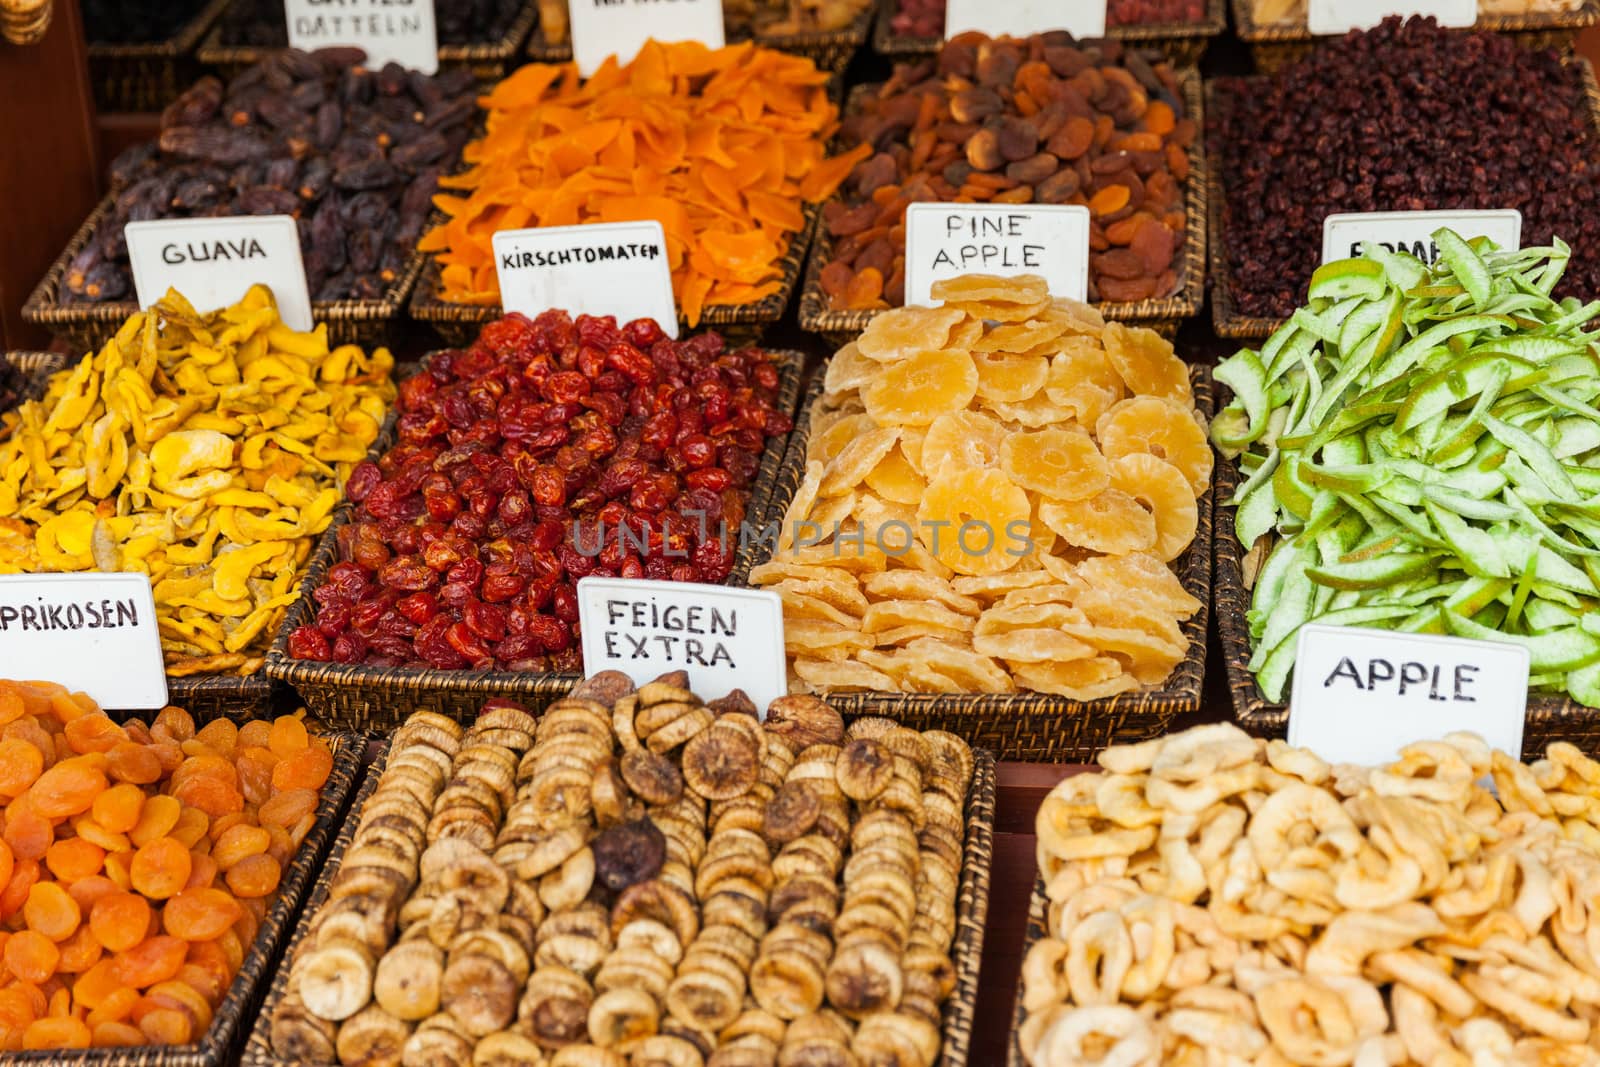 Healthy eating sweet dried fruit and vegetable snack bowls at food market